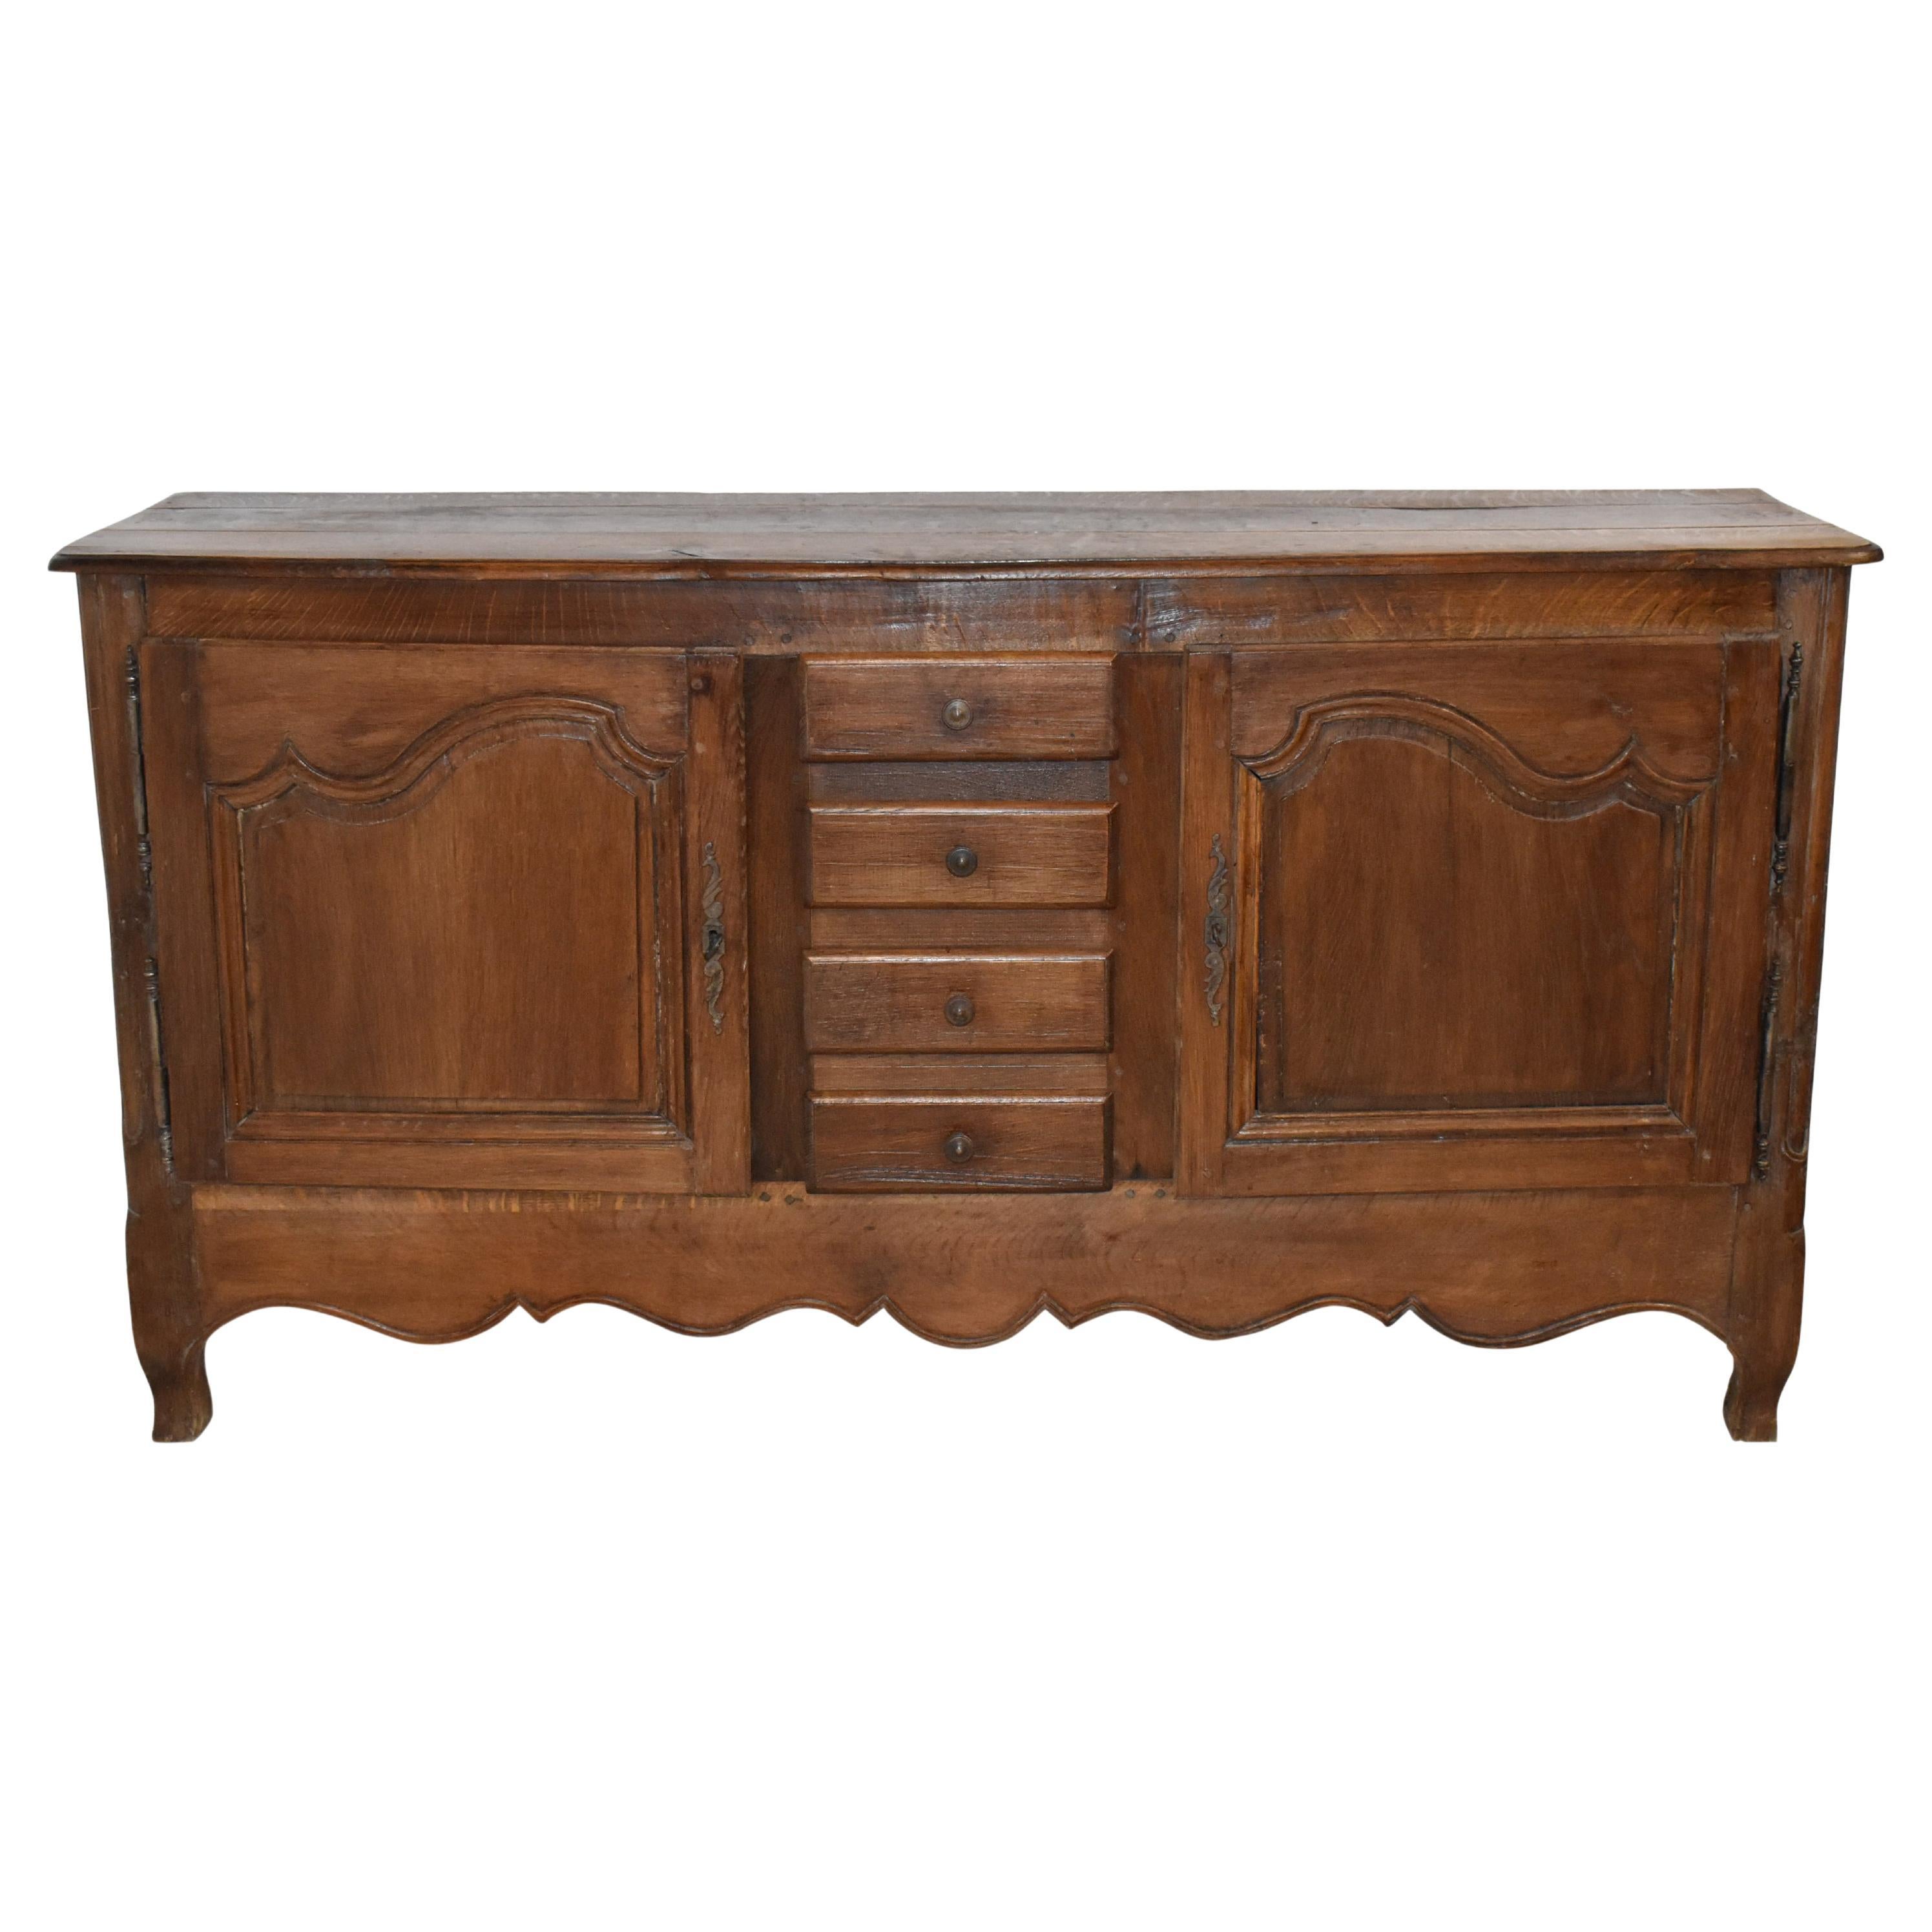 Rustic Oak Sideboard with Two Doors and Four Drawers, circa 1880